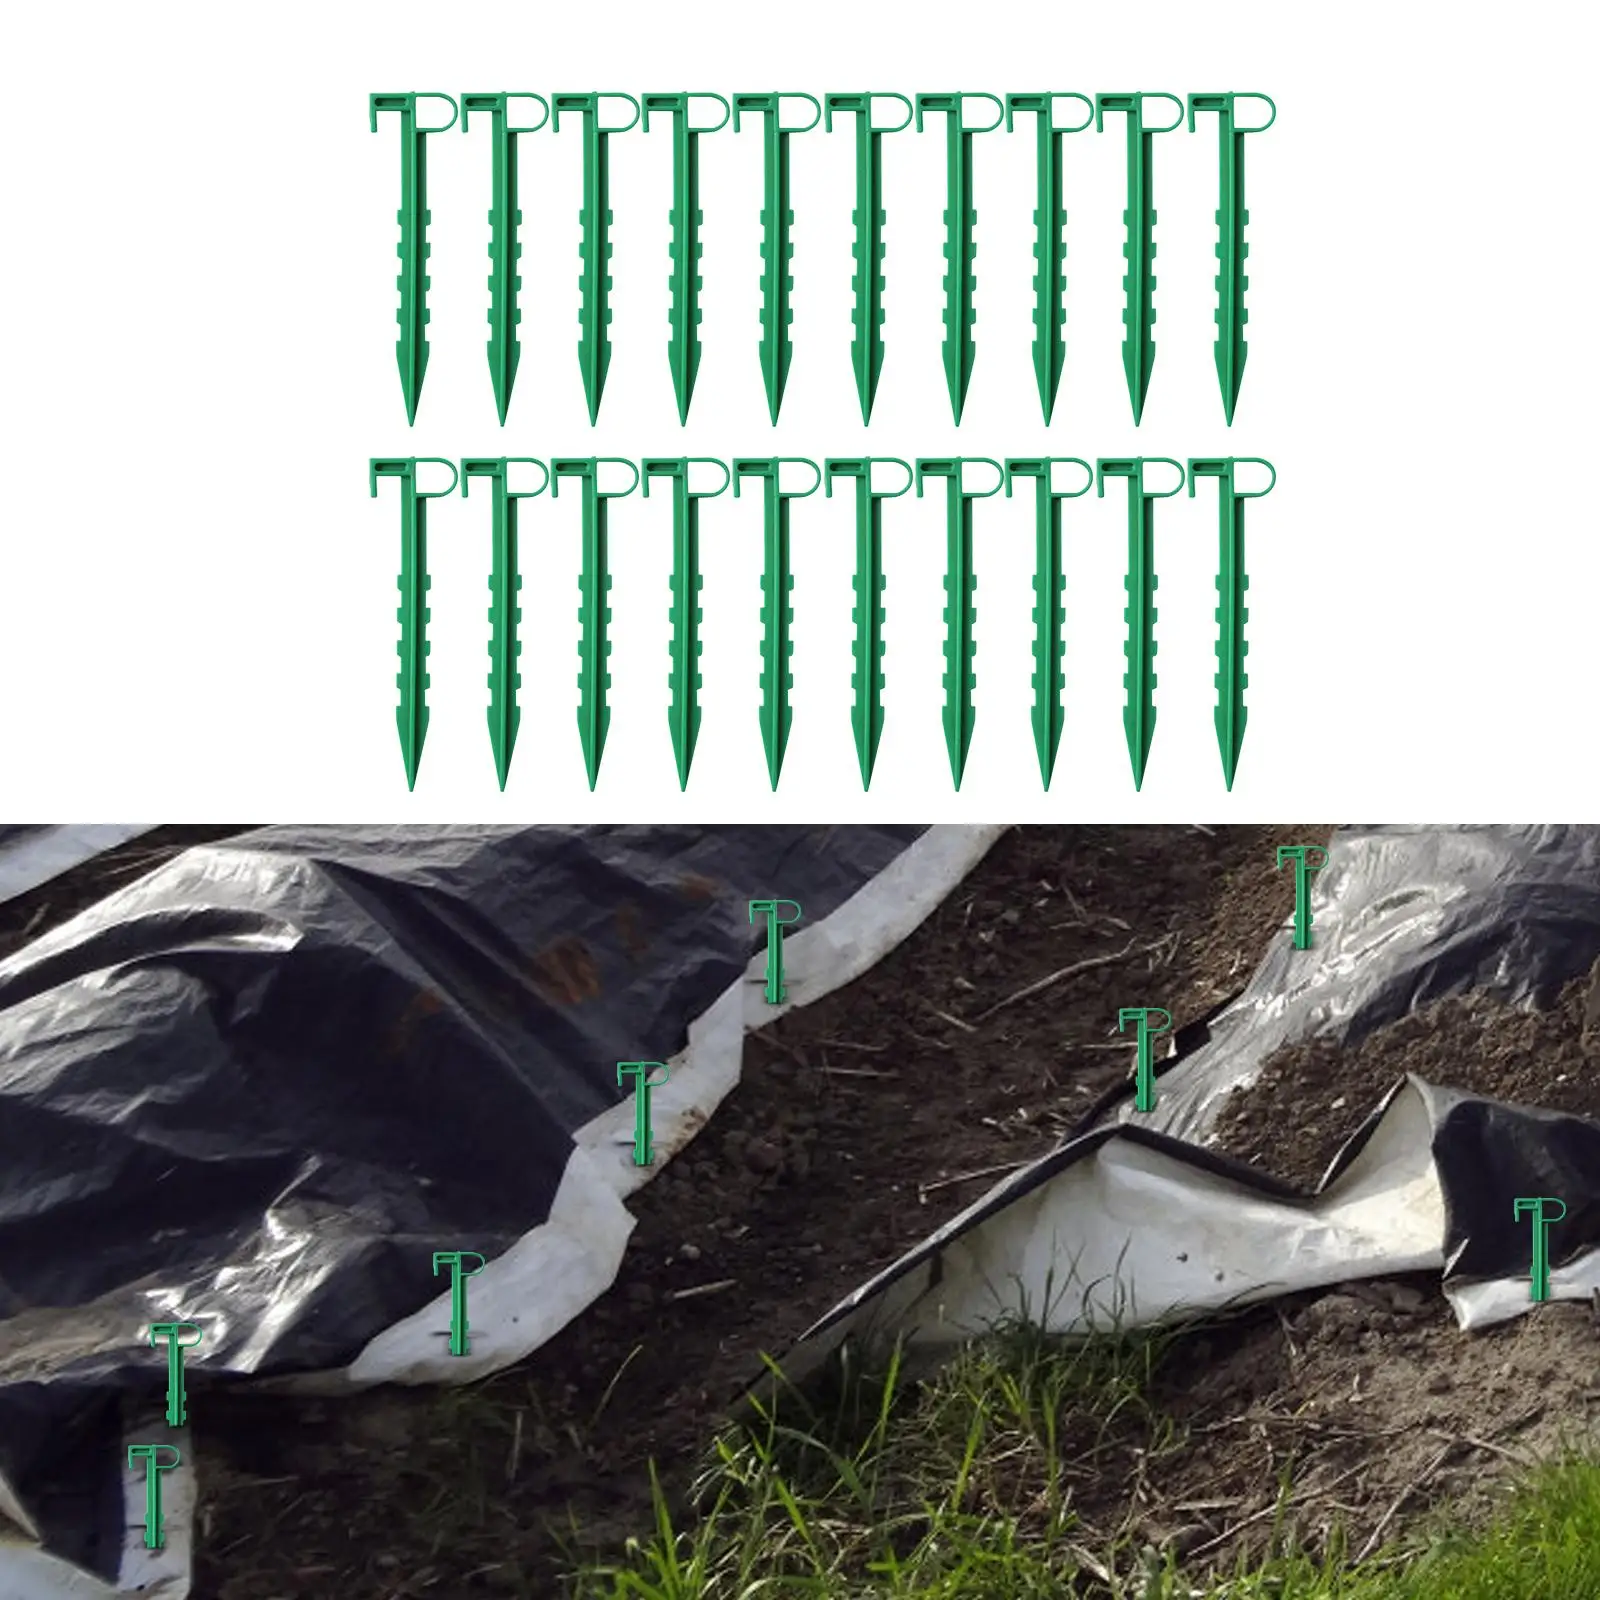 20x Garden Stakes Durable Landscape Nails Anchor Ground Auger Fixation Anchor